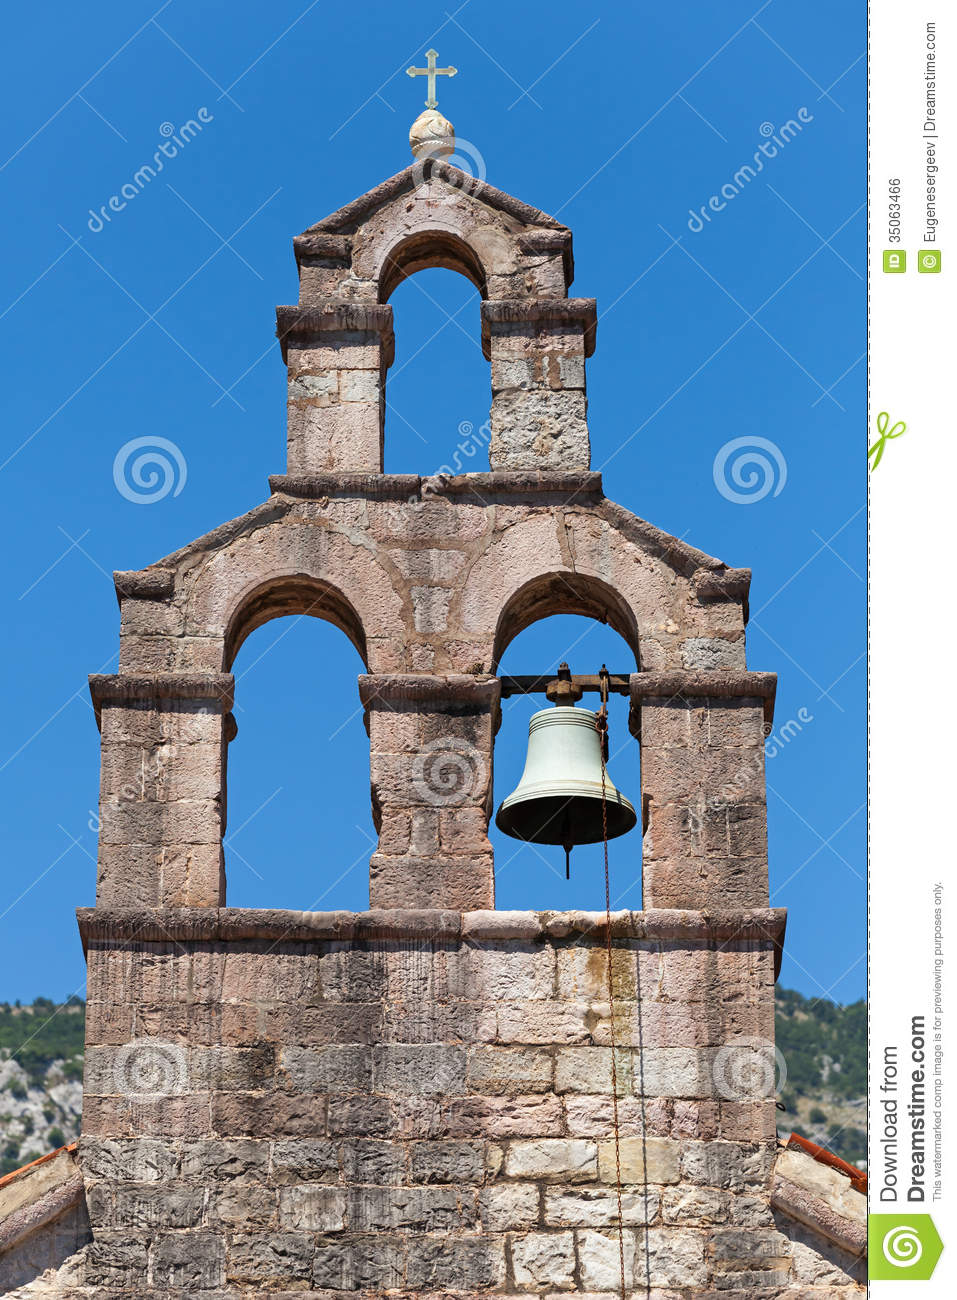 Serbian Orthodox Church Bell Tower Royalty Free Stock Image   Image